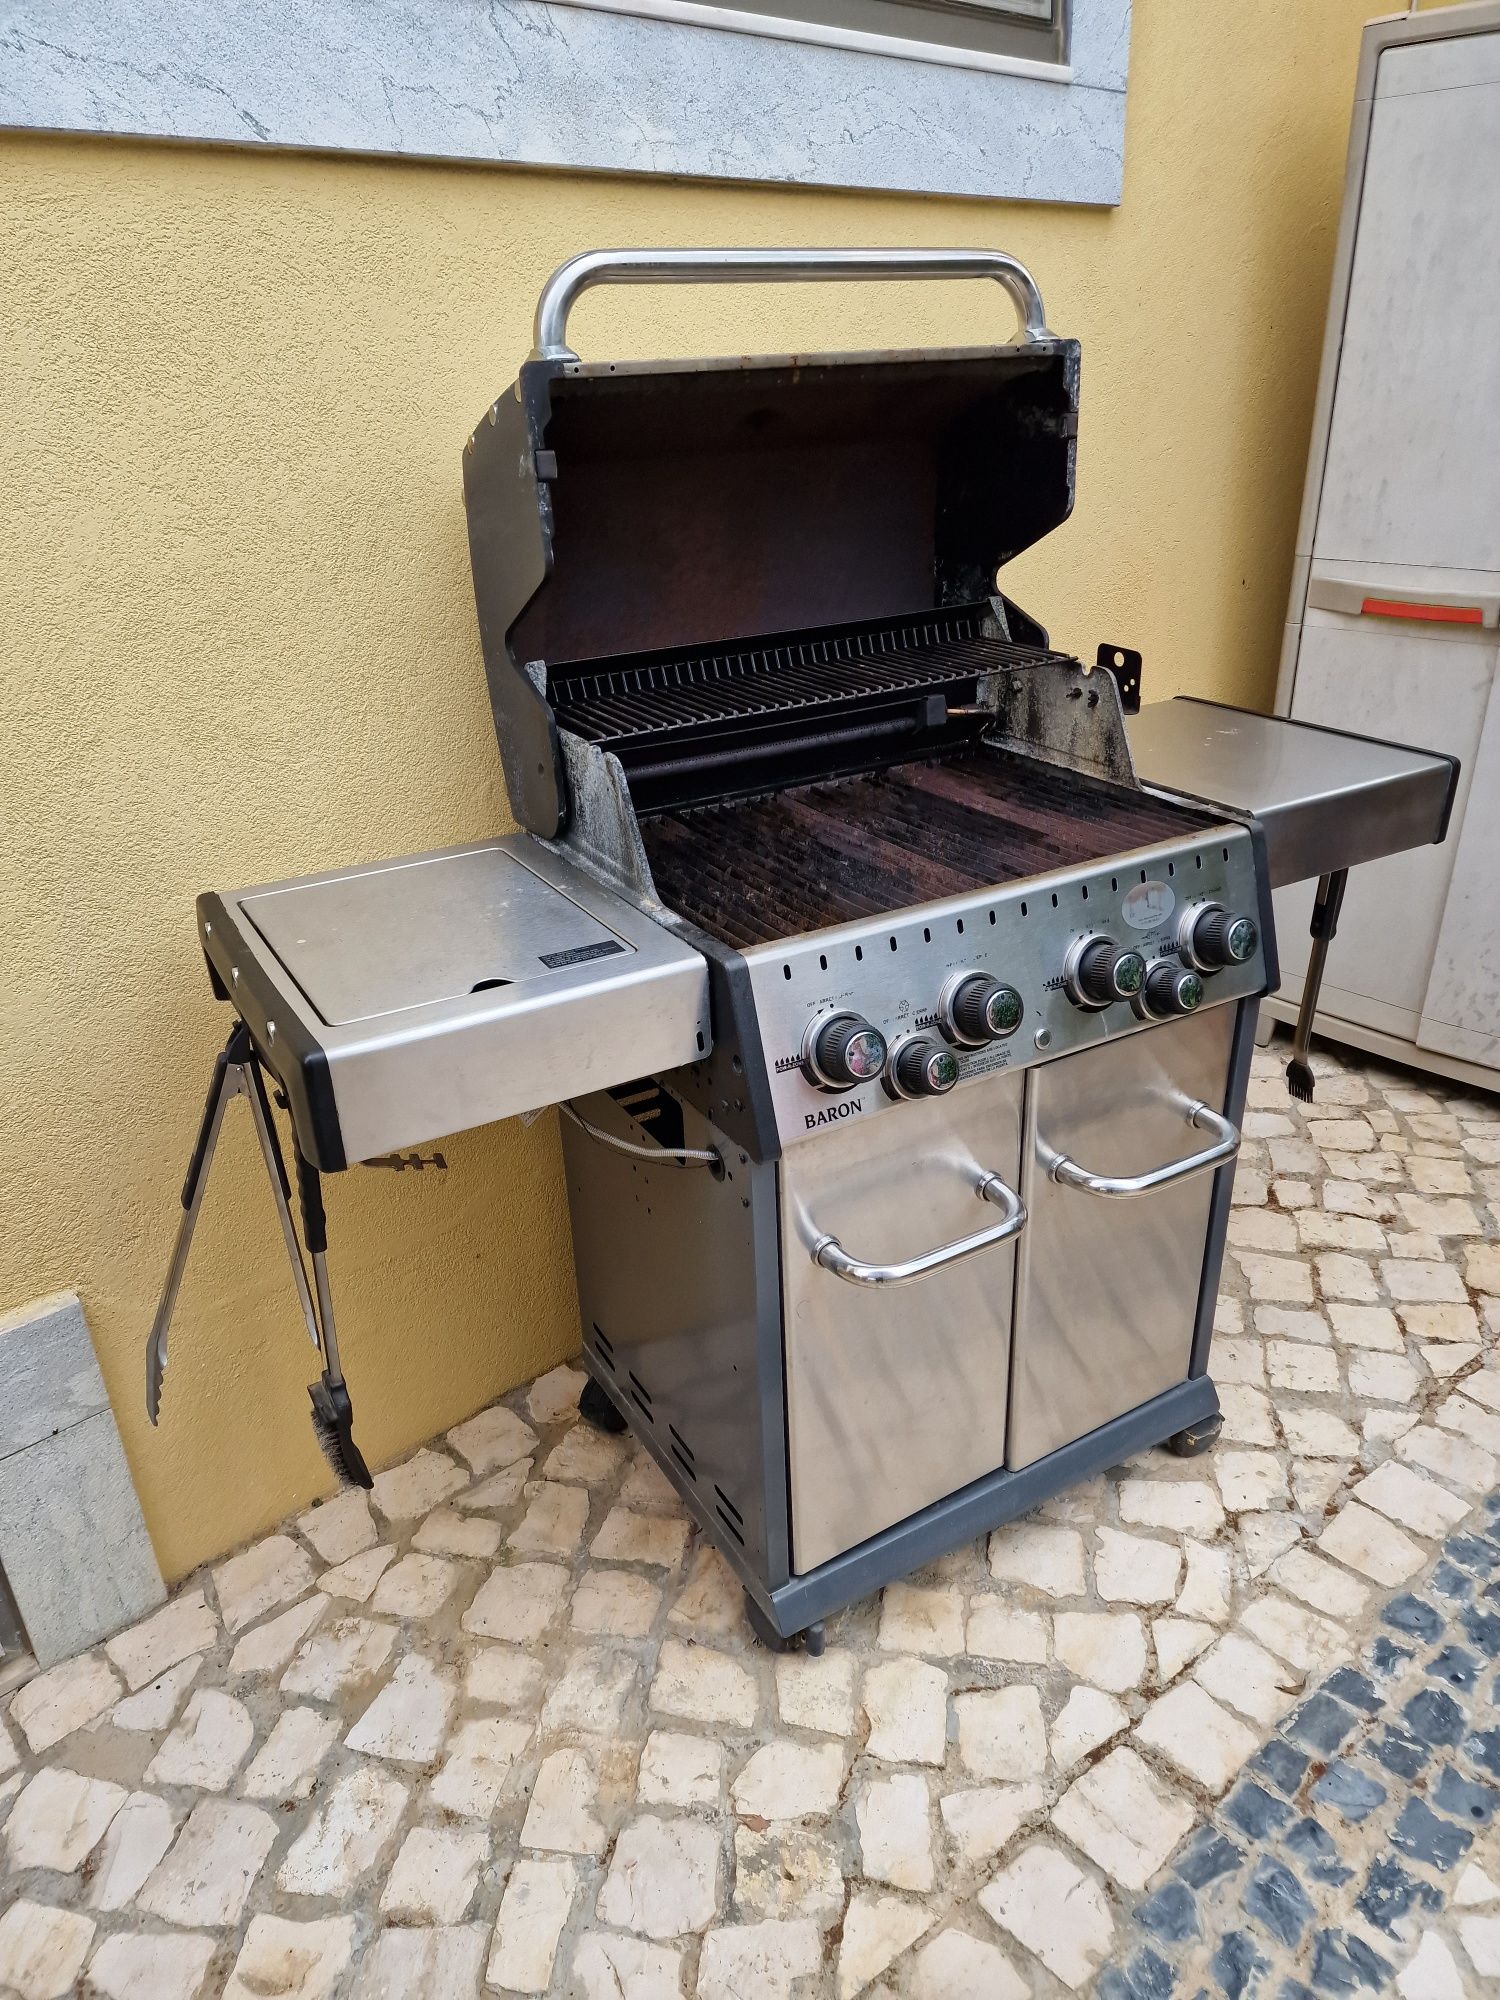 Barbecue Broil King